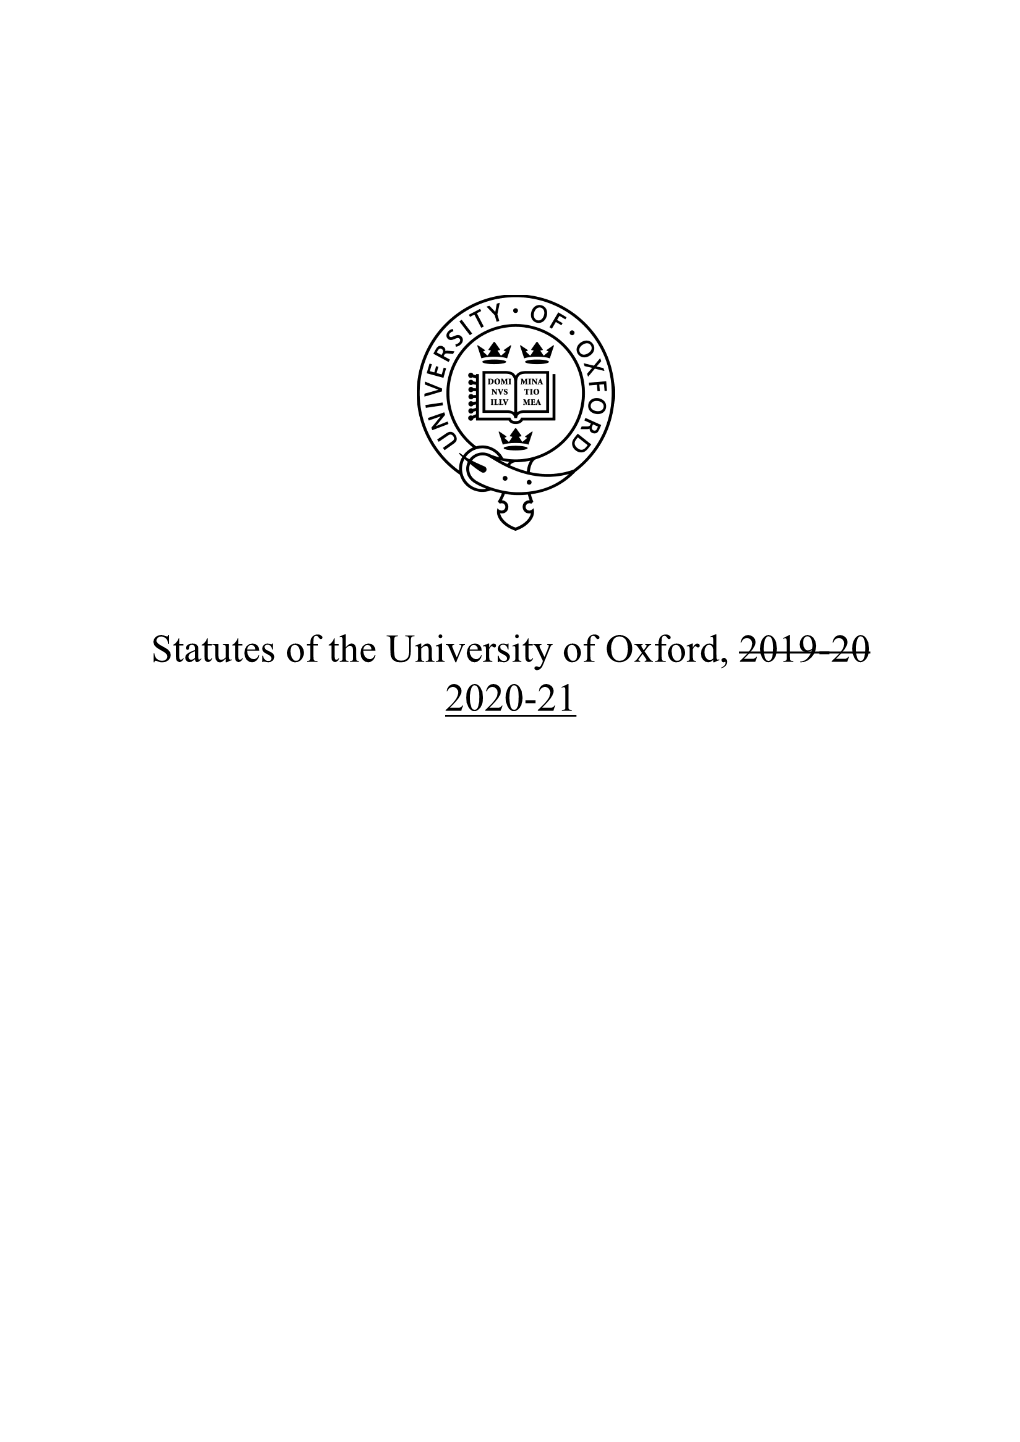 Statutes of the University of Oxford, 2019-20 2020-21